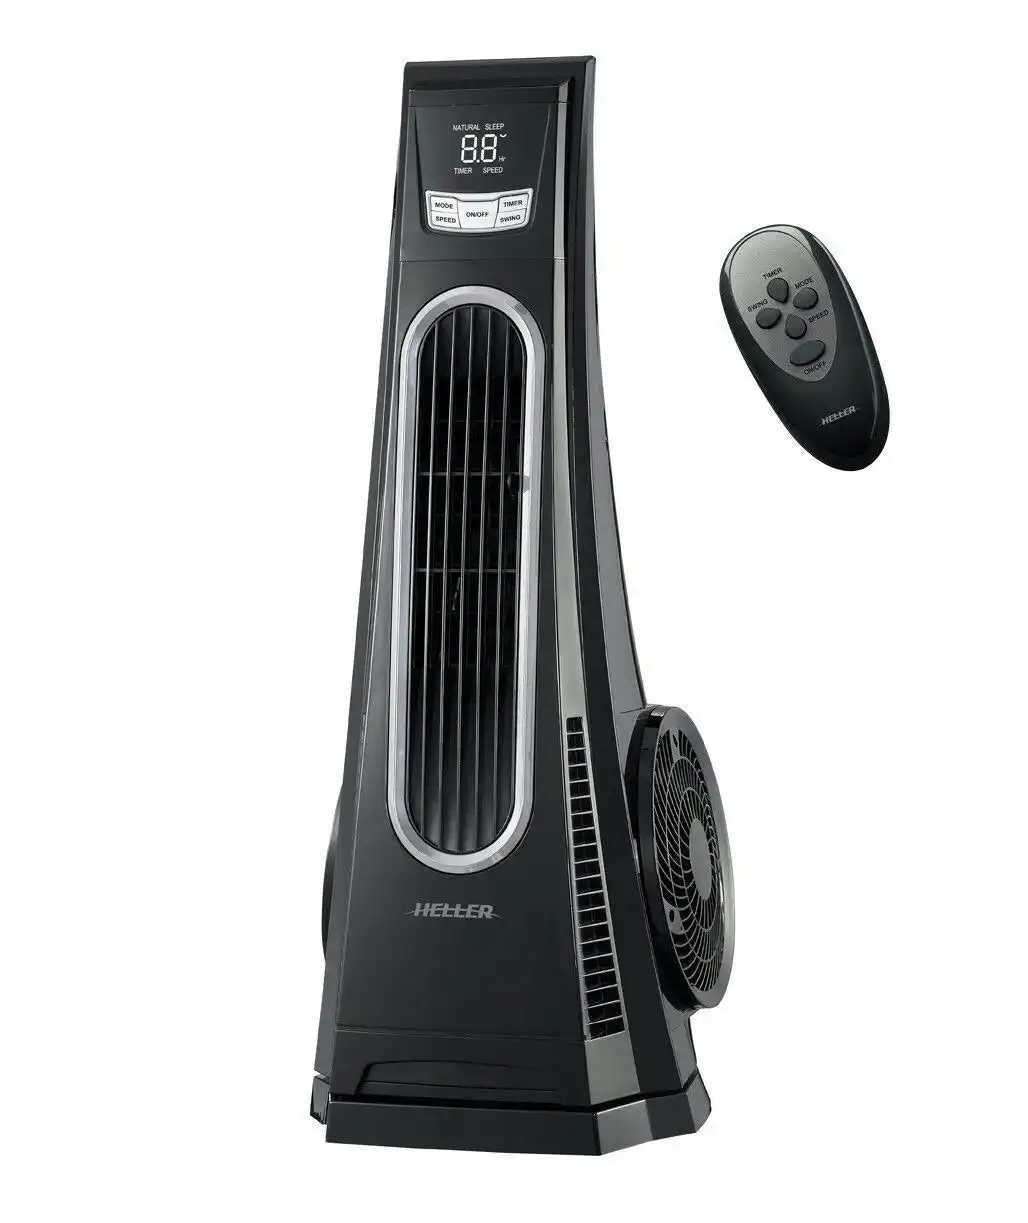 Heller 75cm Turbo Tower Fan with Remote - Black